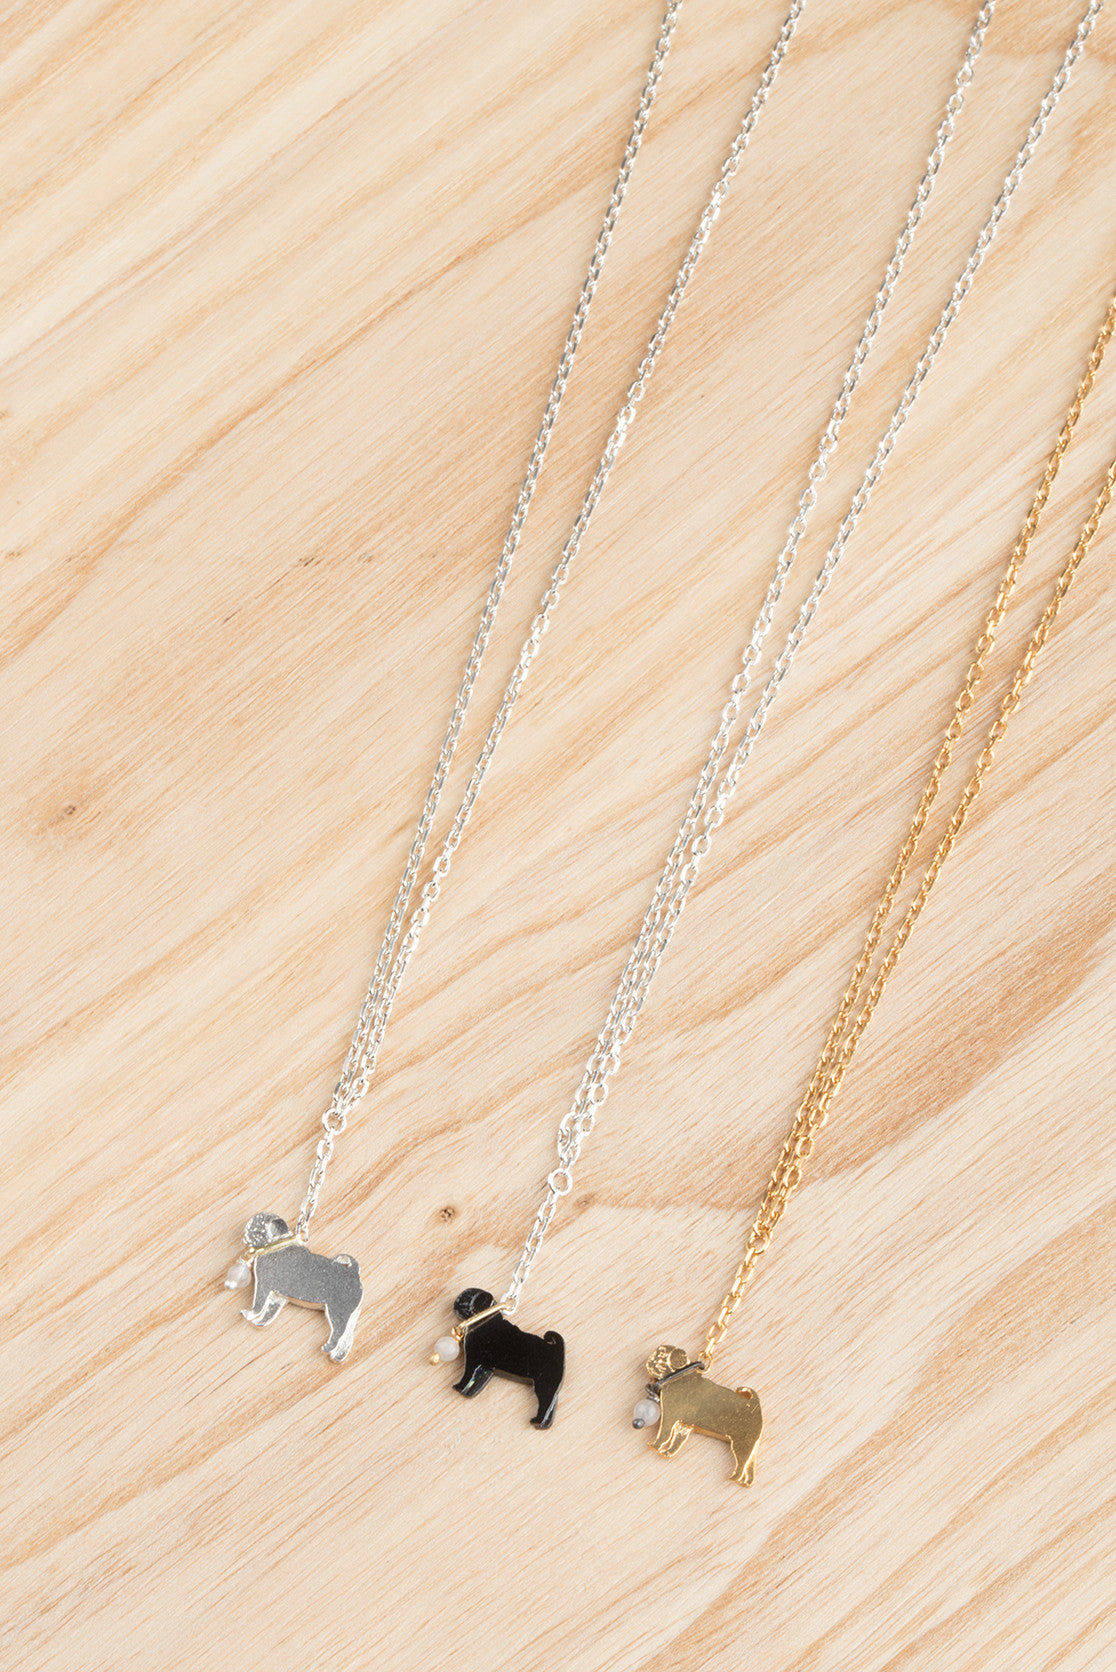 Pug On A Lead Necklace